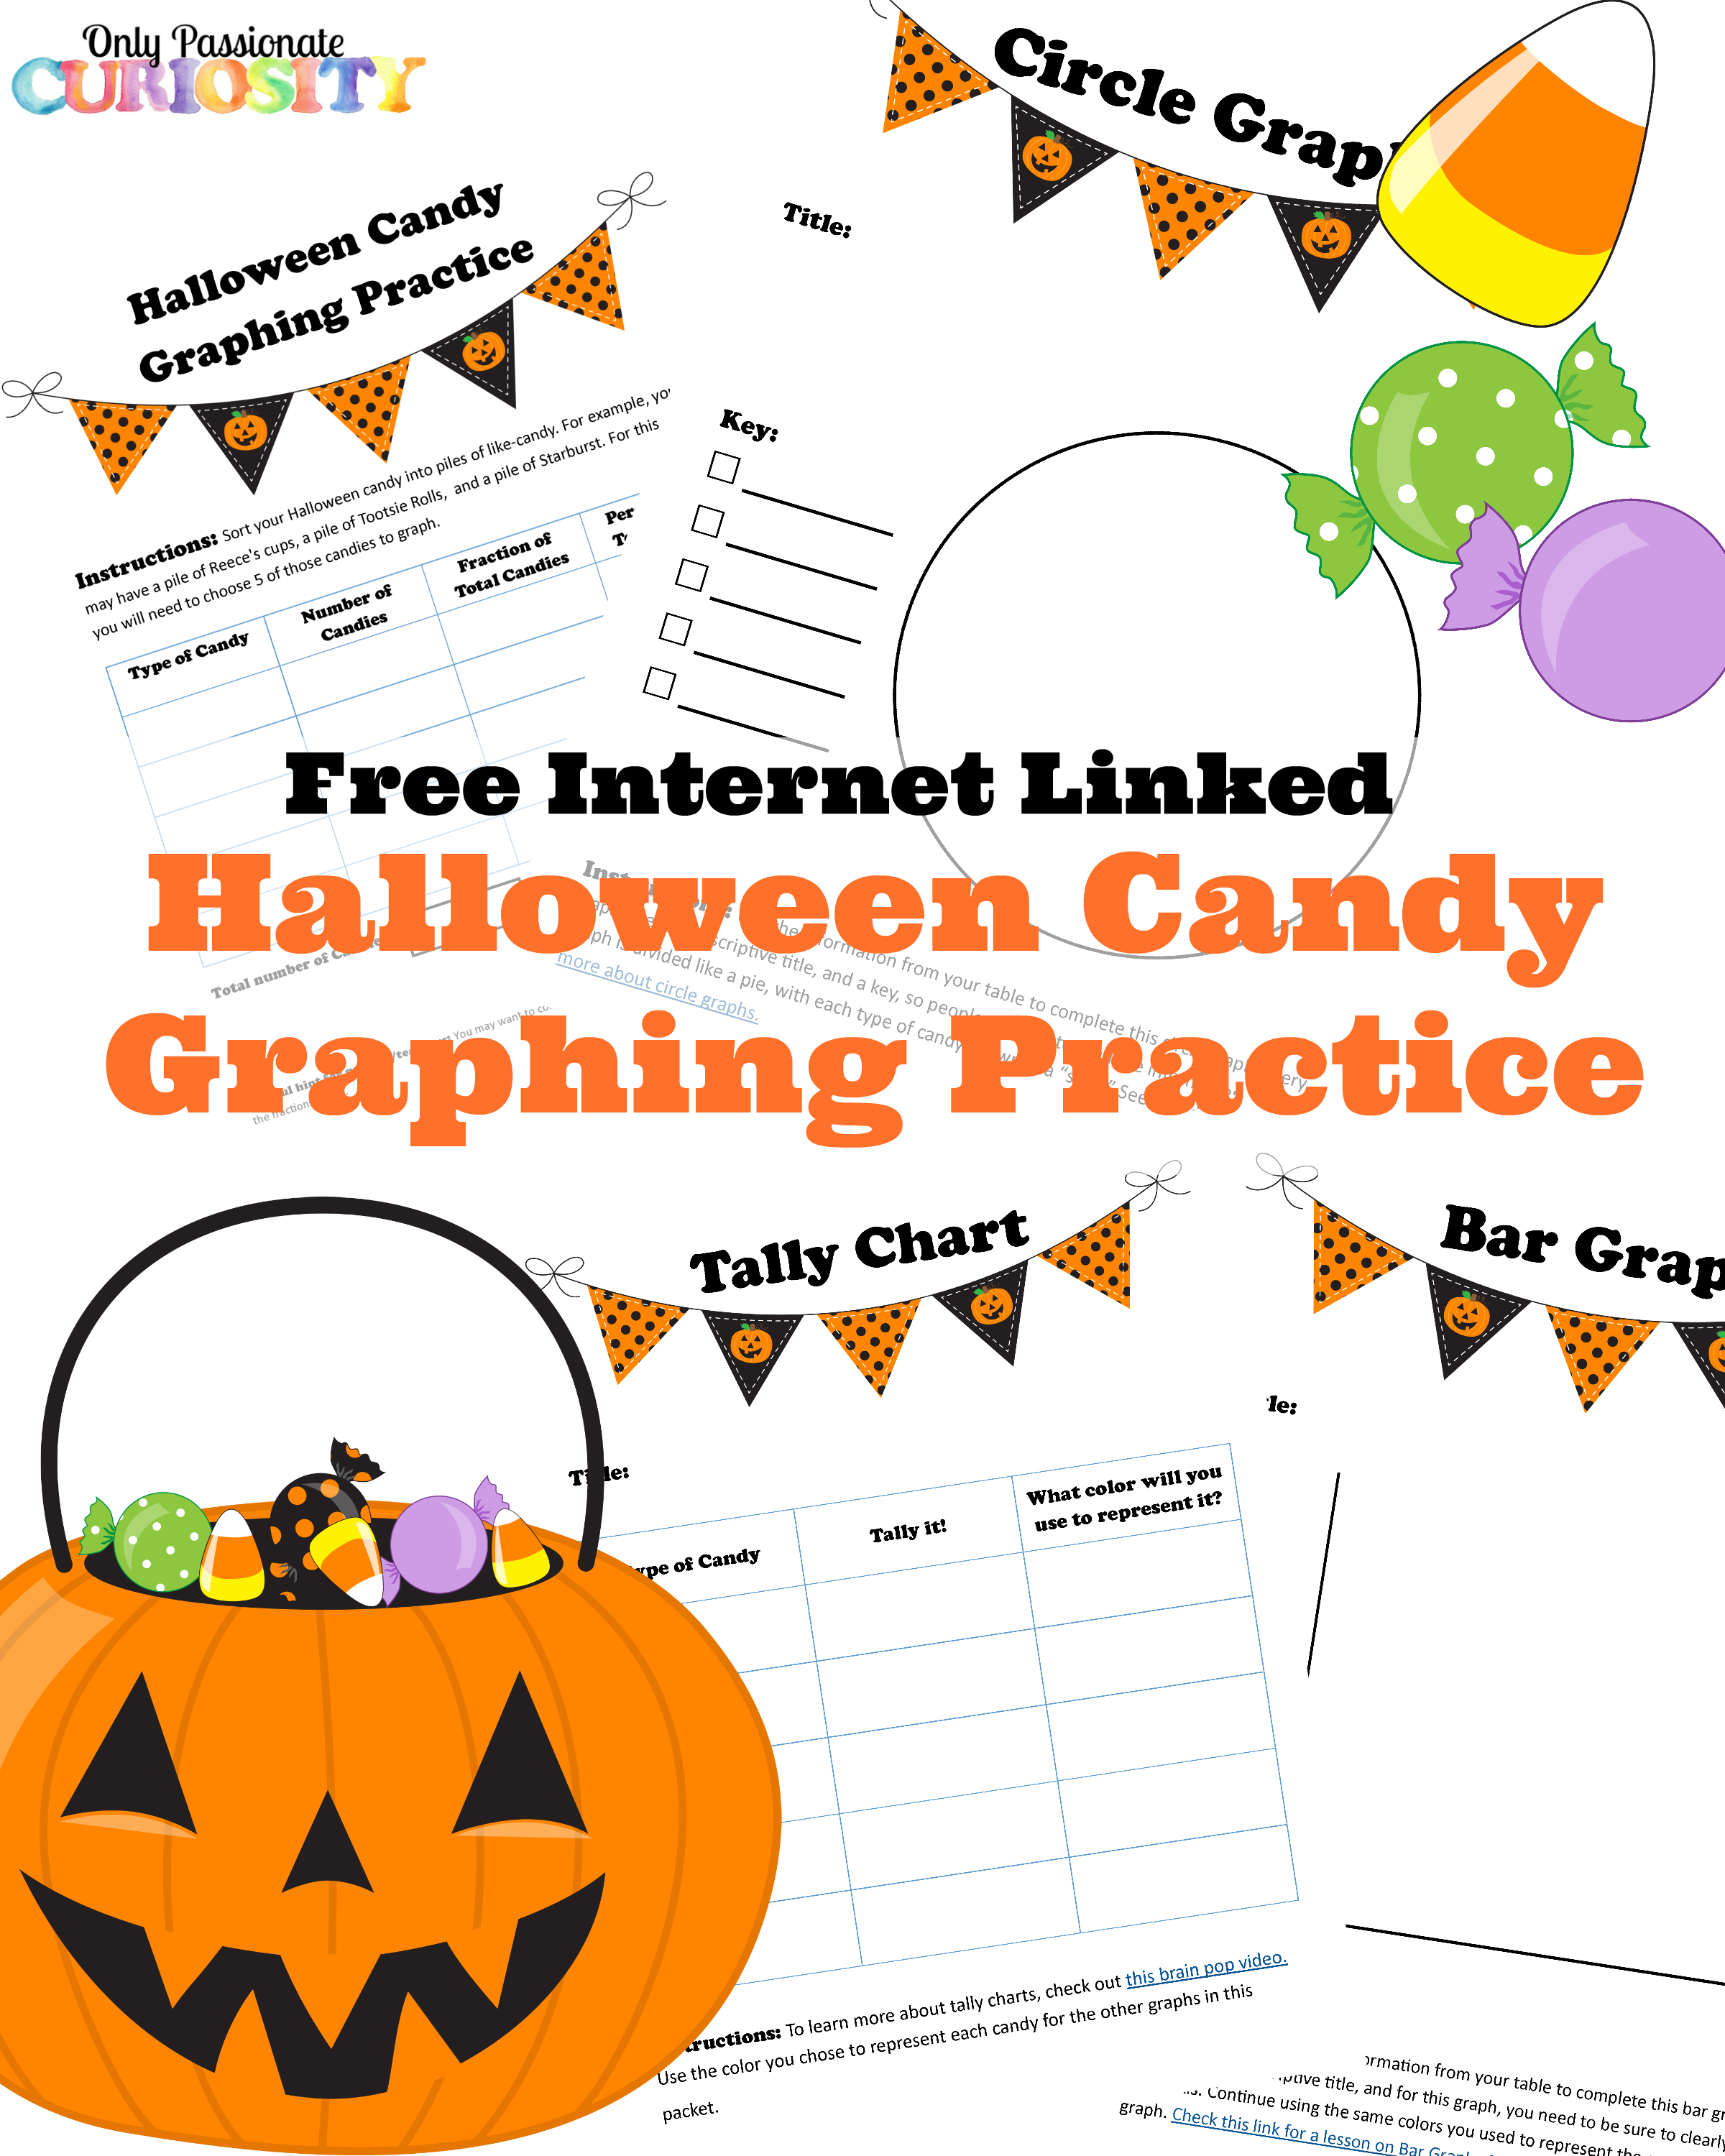 Halloween Candy Graphing Practice | Graphing Activities